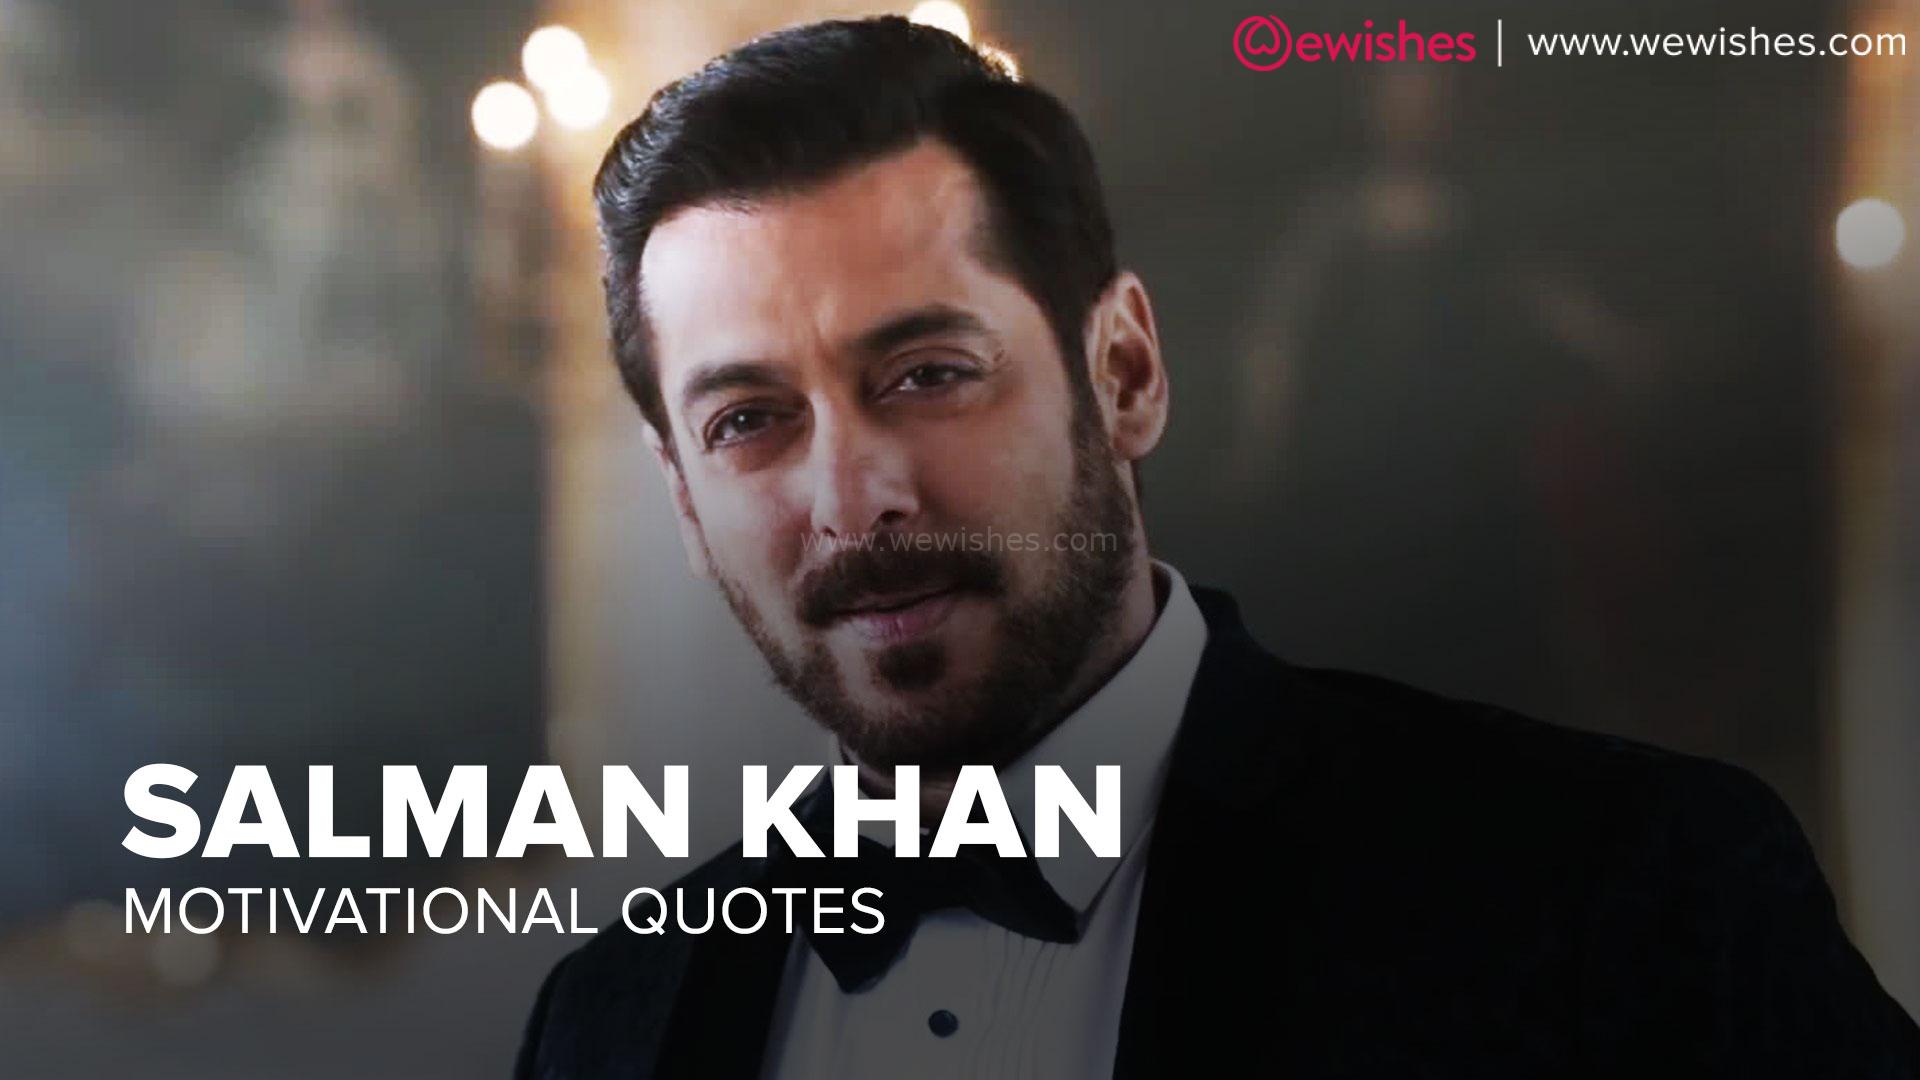 Life Changing Quotes by King of Khan